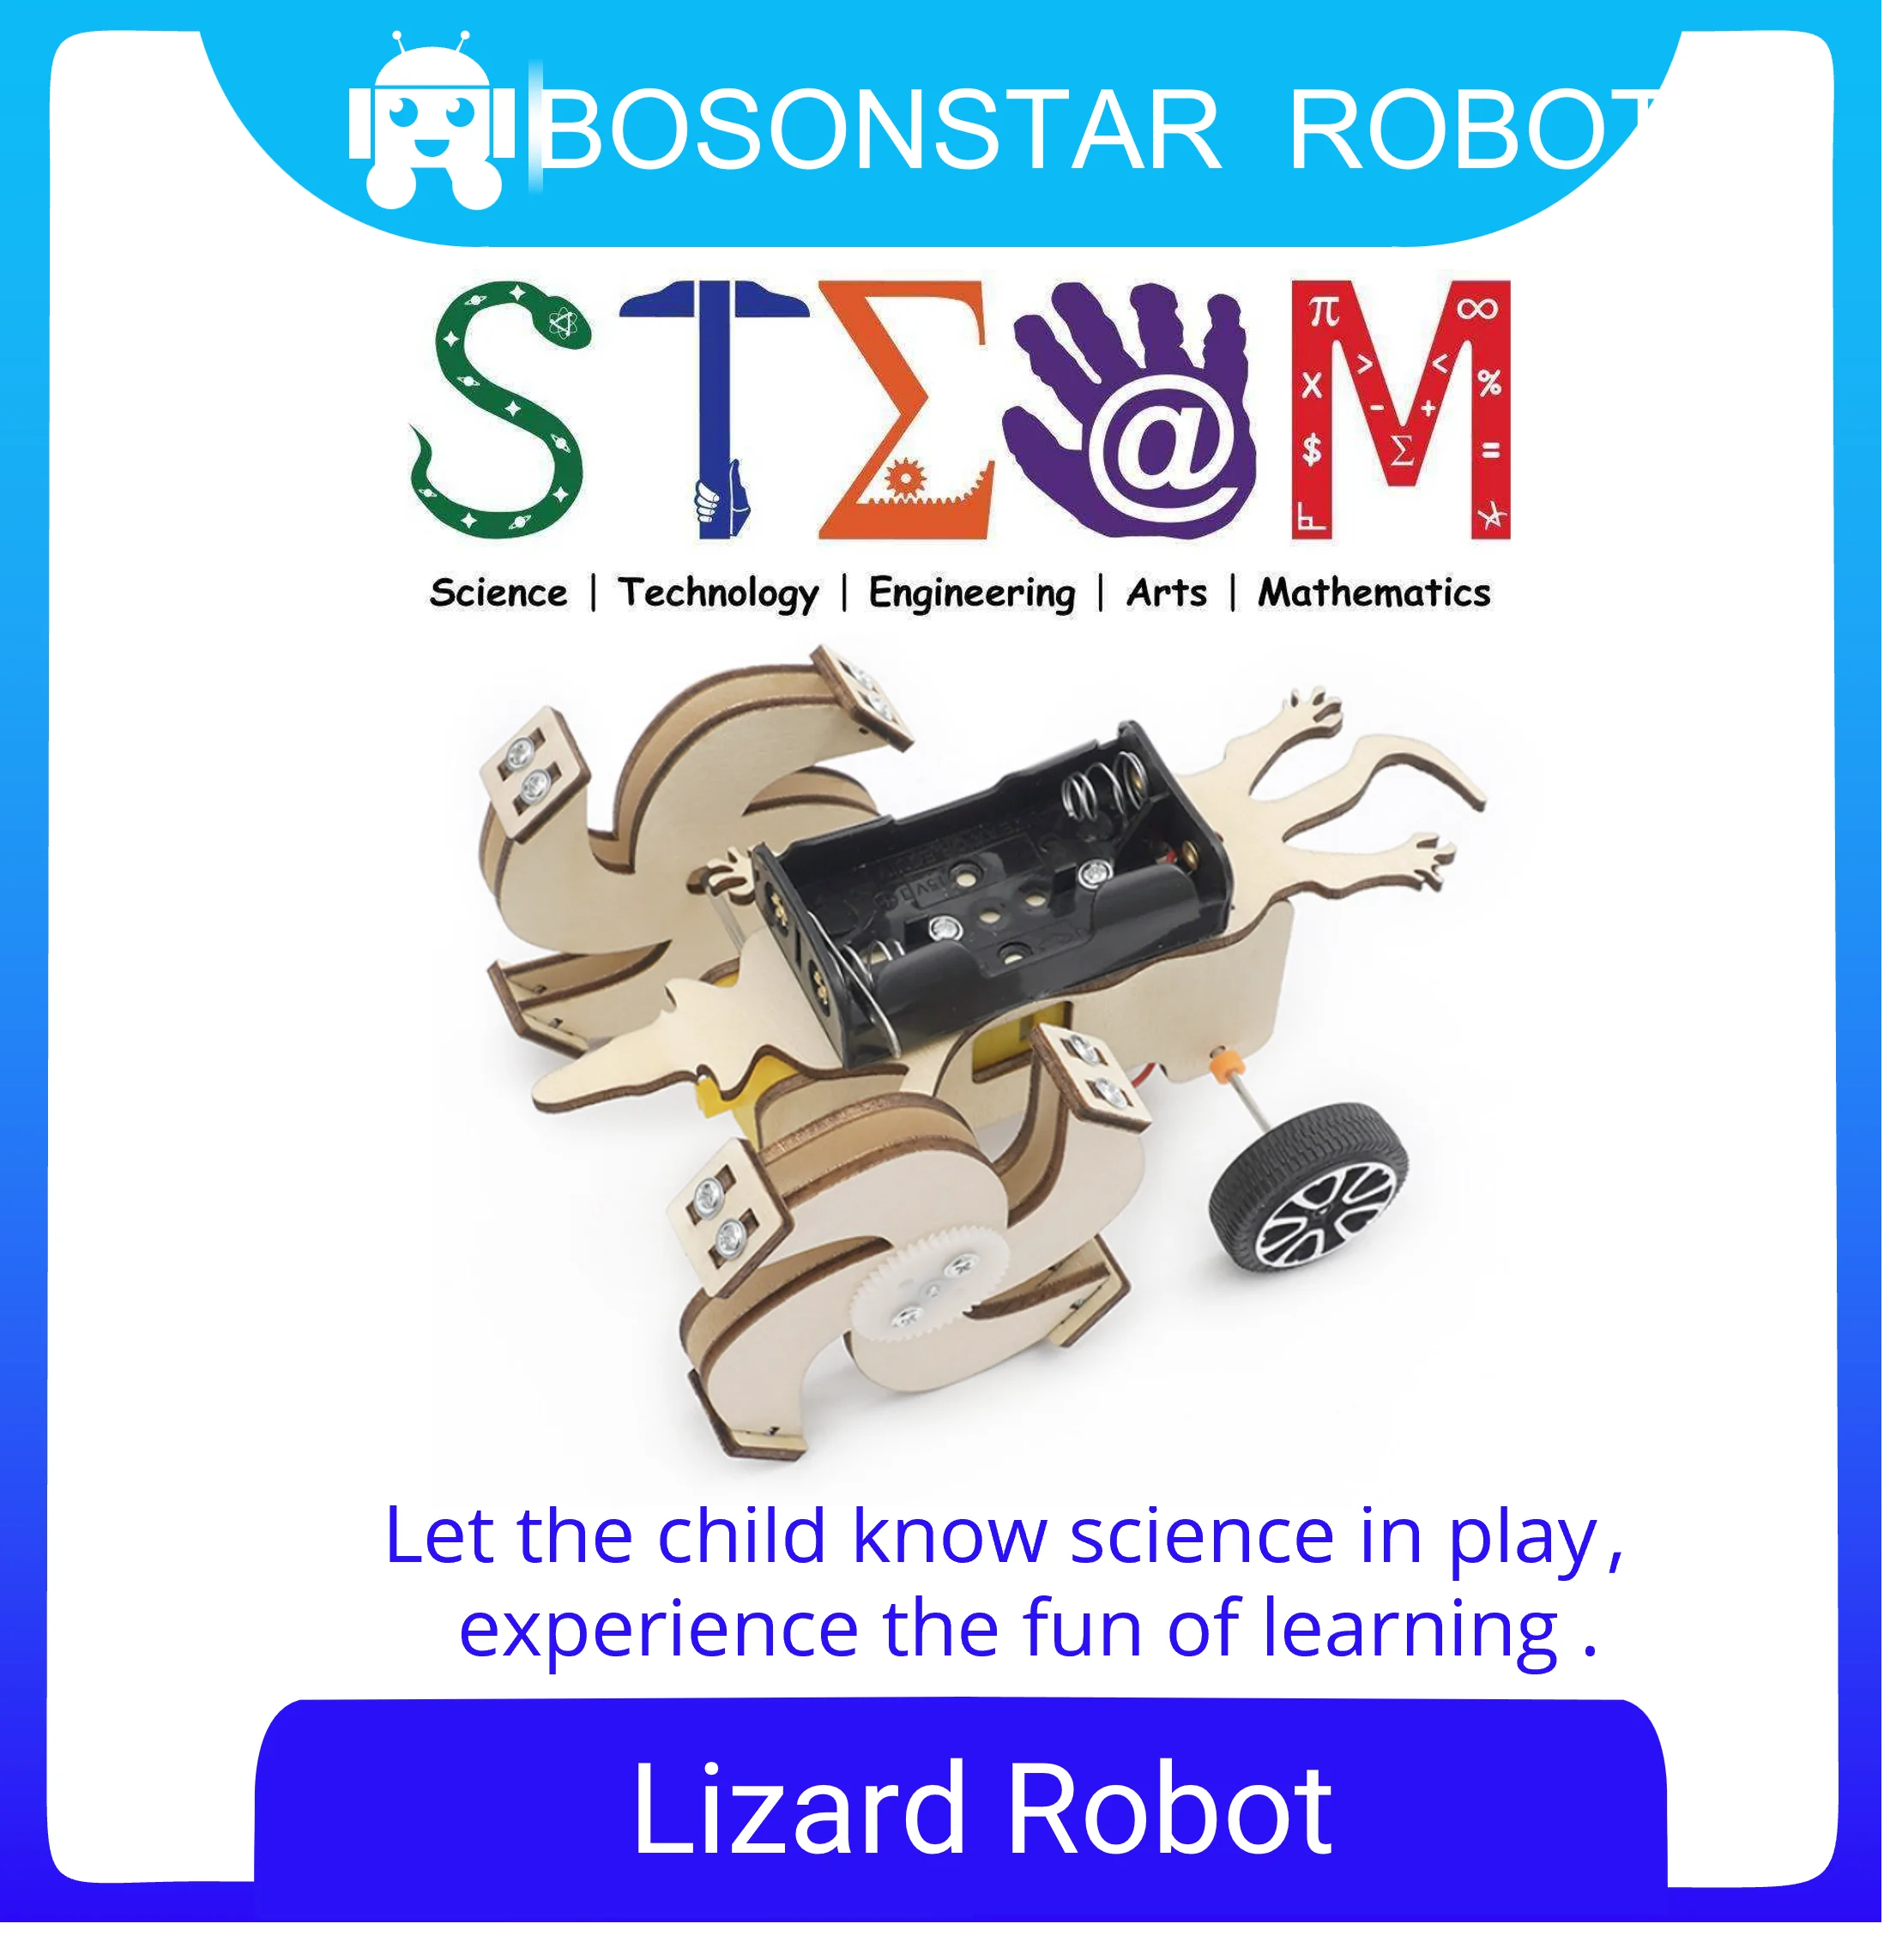 

DIY Assembled Model Electric Lizard Robot Science Discovery STEM Education Physics Experiment Kit For Children Gifts